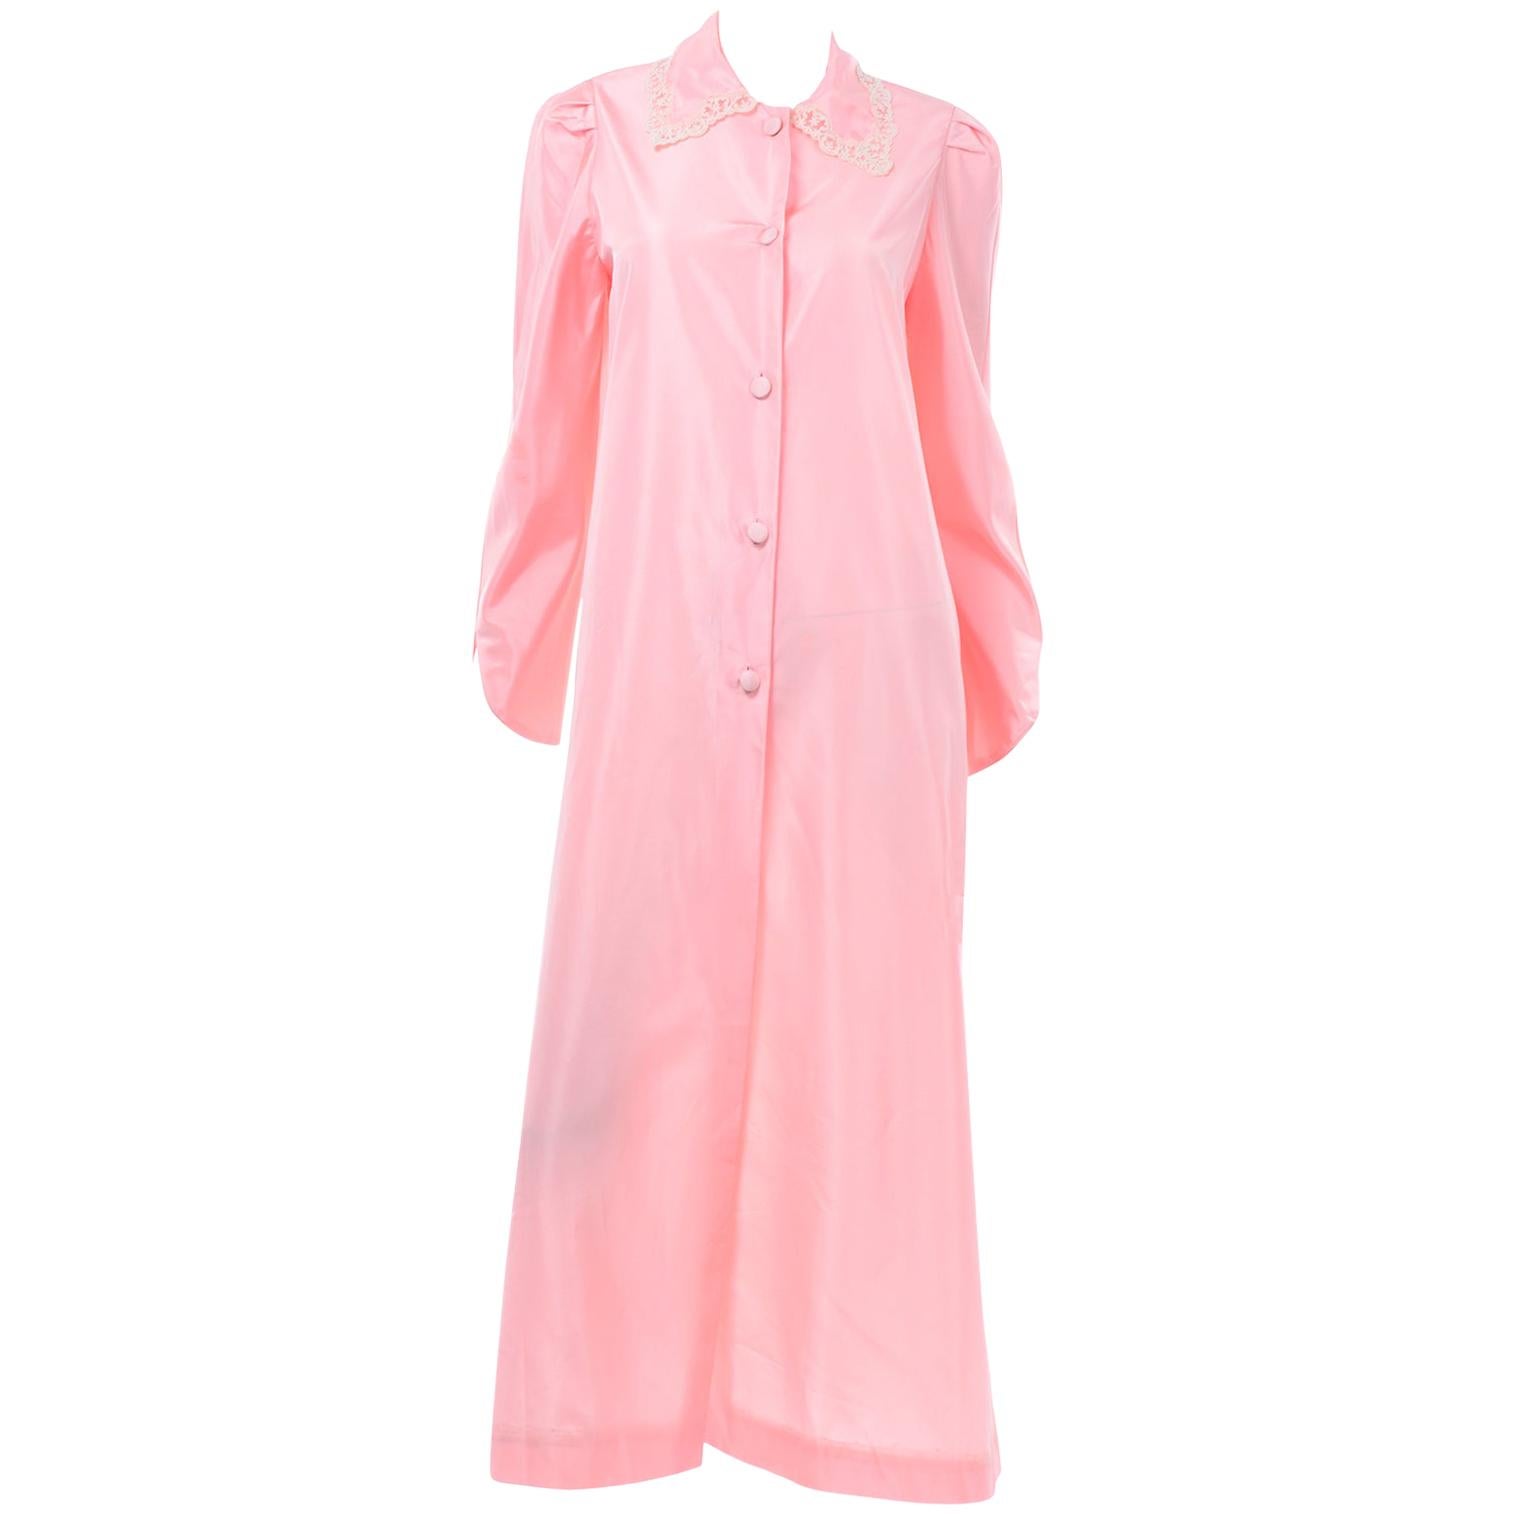 Chloe Vintage Button Front Pink Taffeta Robe With Lace Trim For Sale